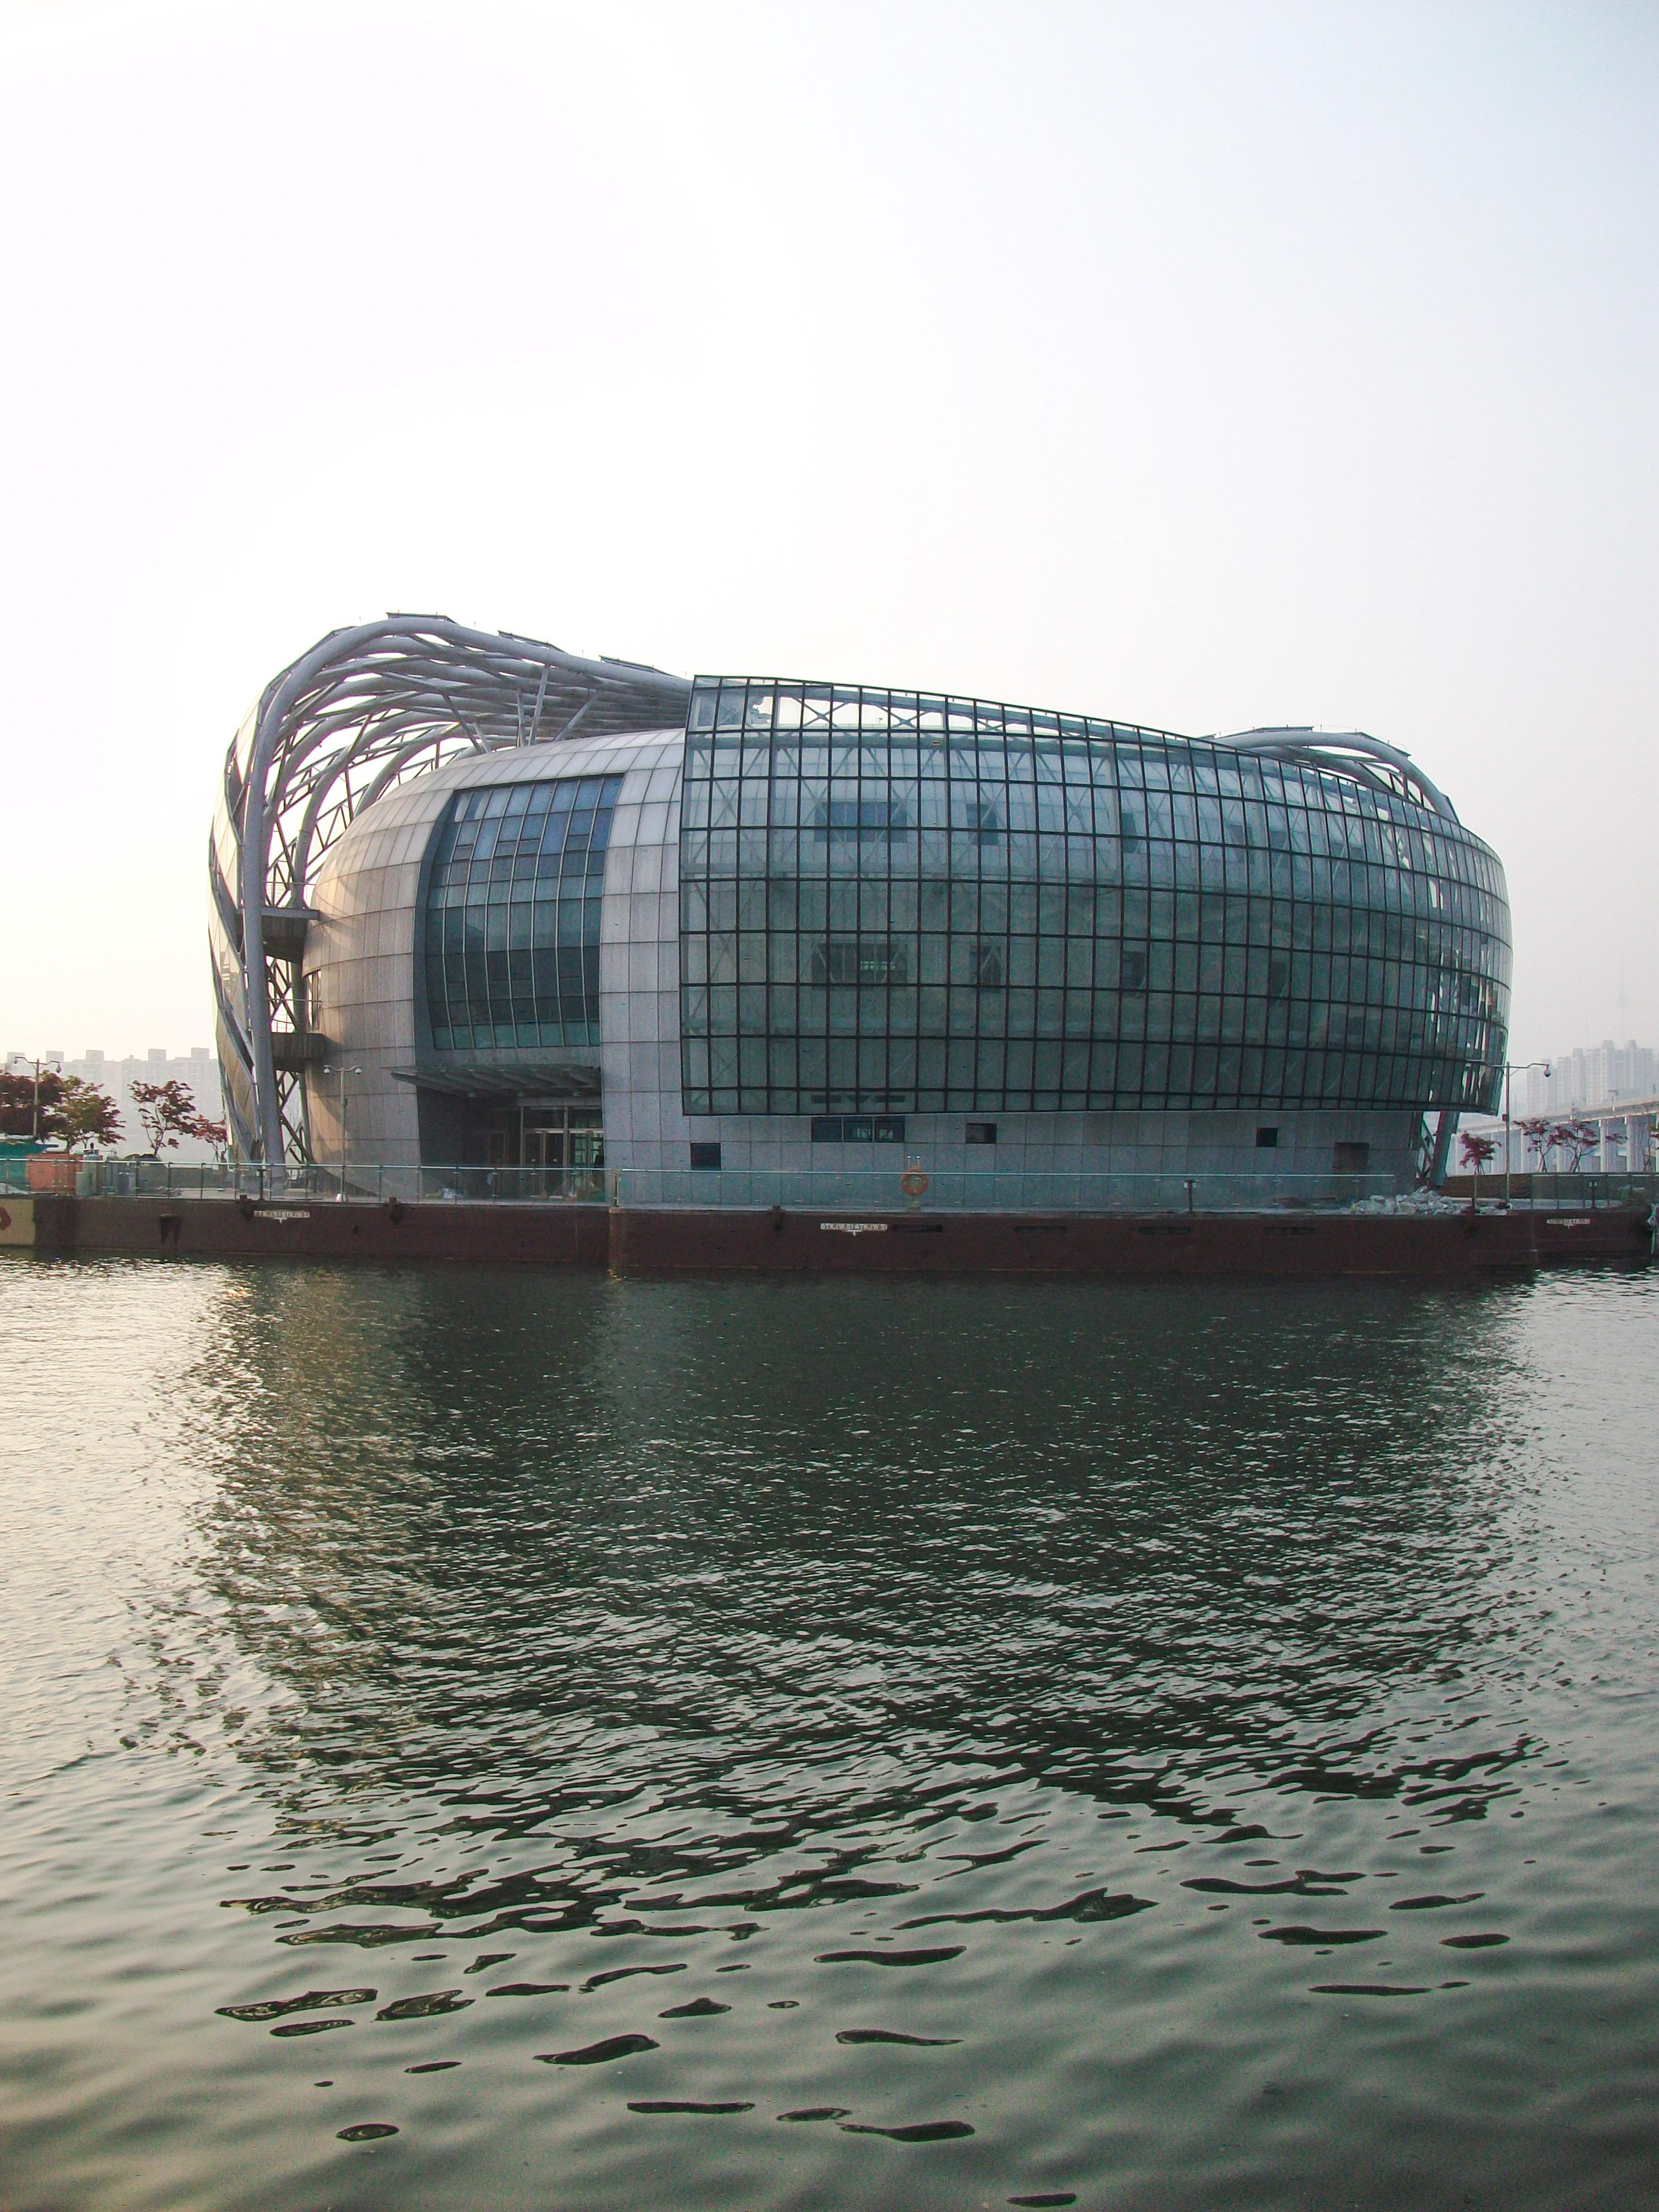 Seoul Floating Islands / Haeahn Architecture + H Architecture